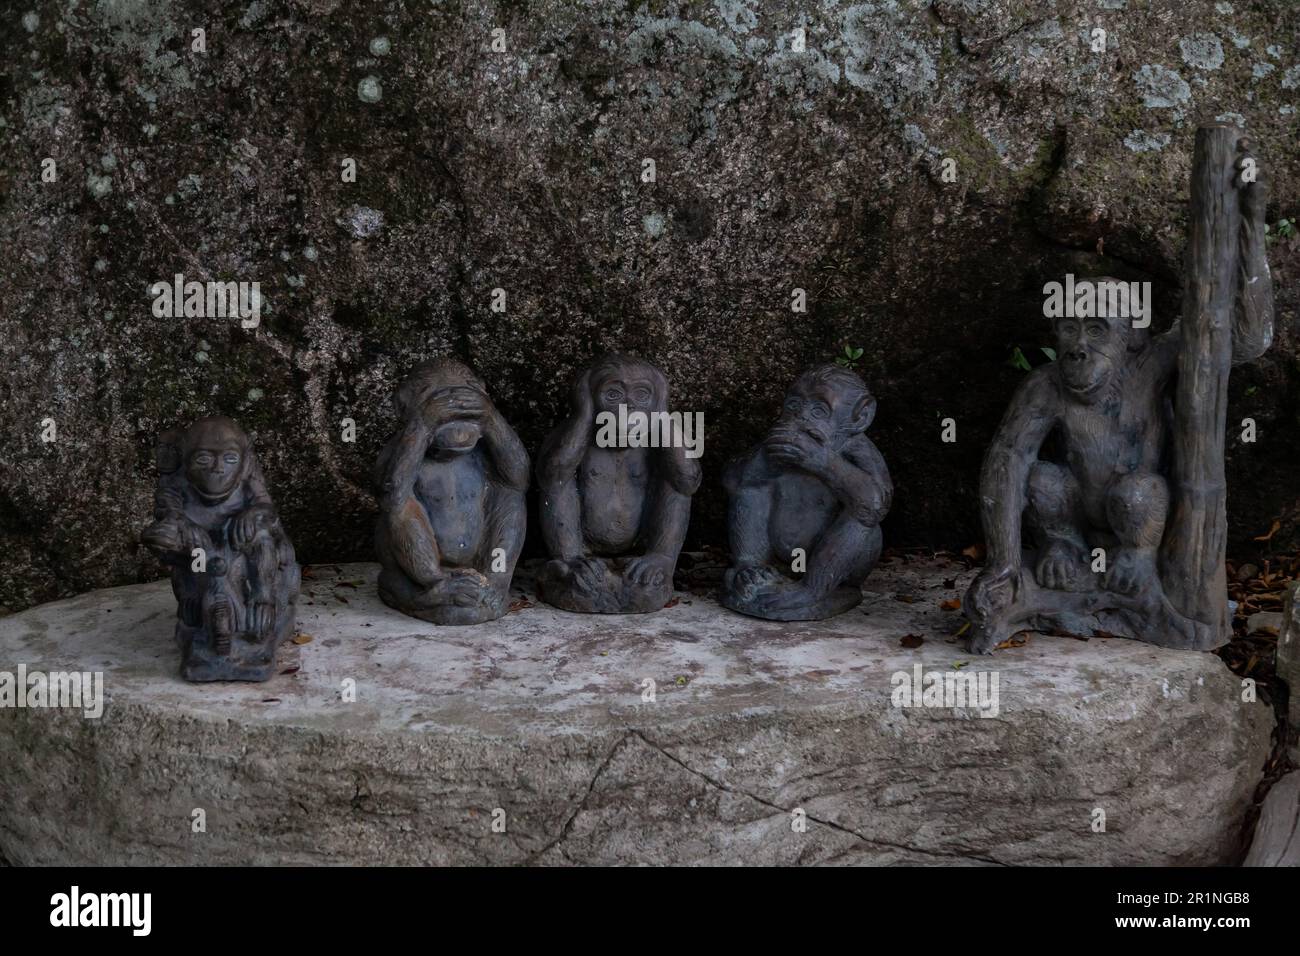 three wise monkeys sculpture depicting the concept of Buddhism Stock Photo